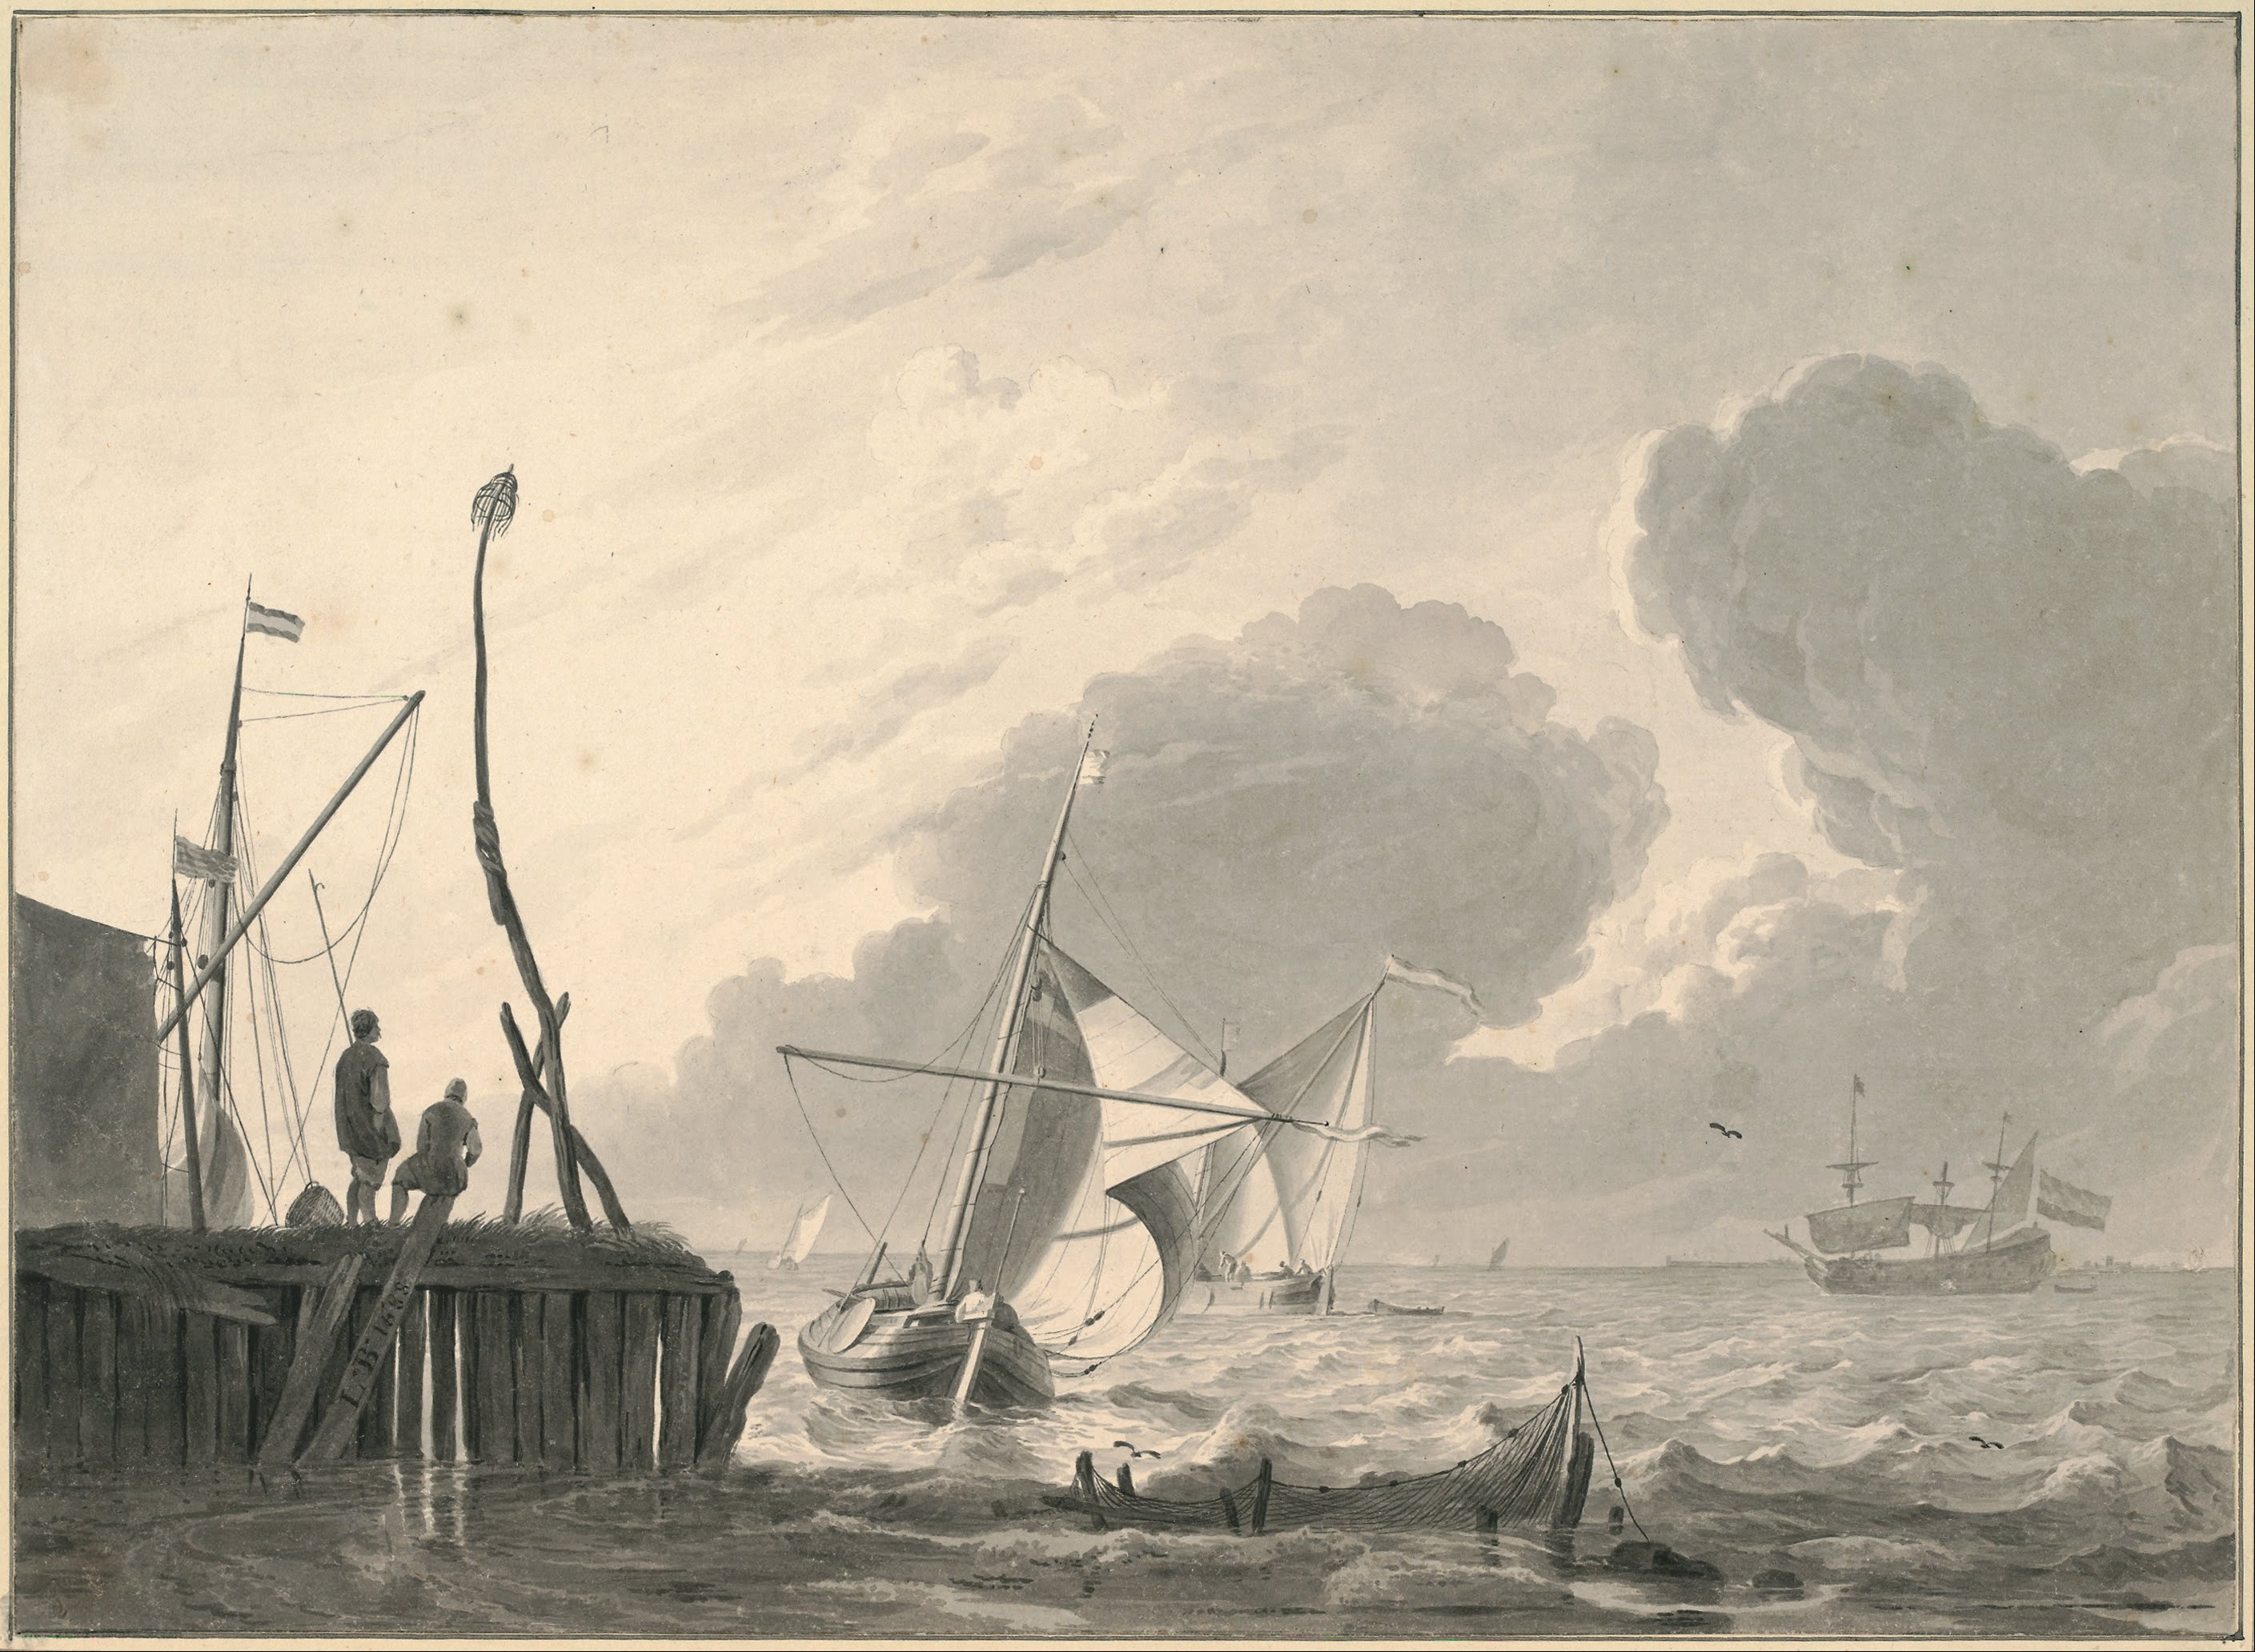 Ludolf Bakhuizen - Harbor on the Sea in Gathering Thunderstorm - Google Art Project